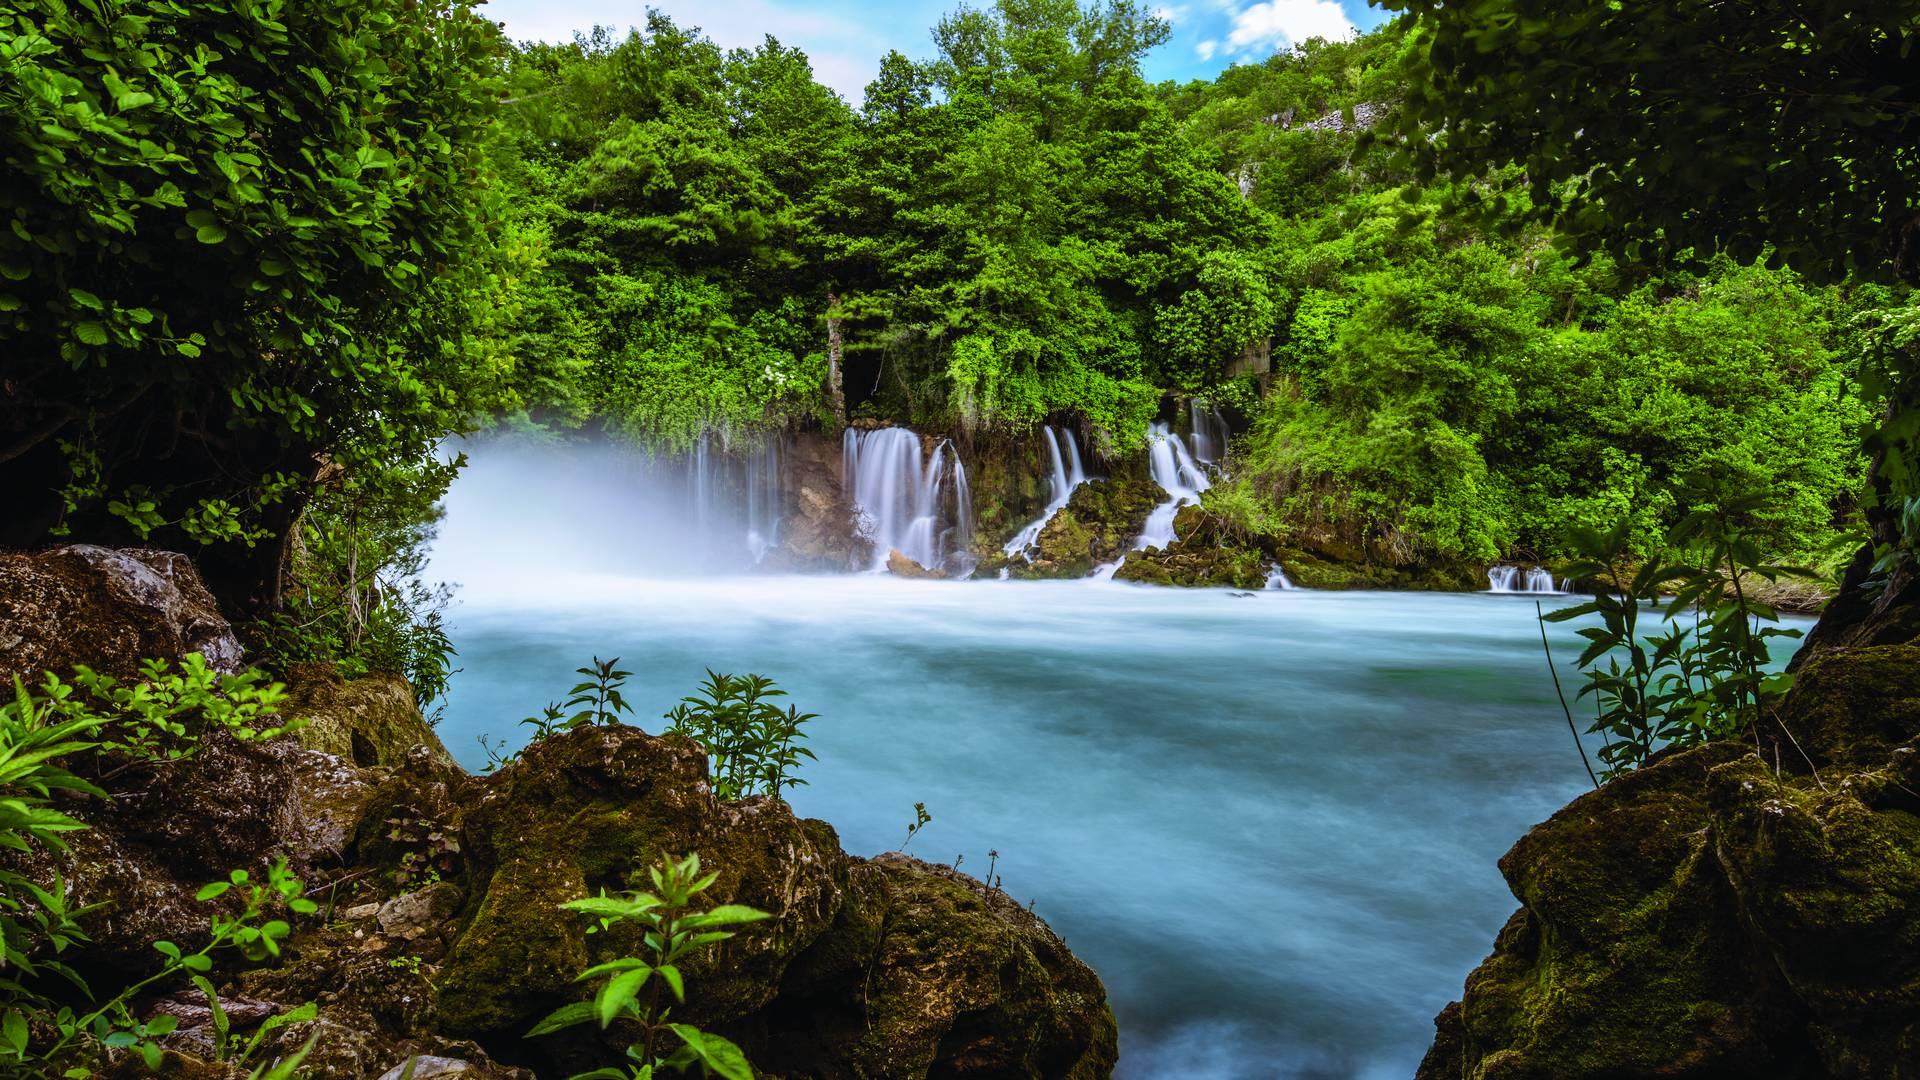 Cover image of this place National park Krka